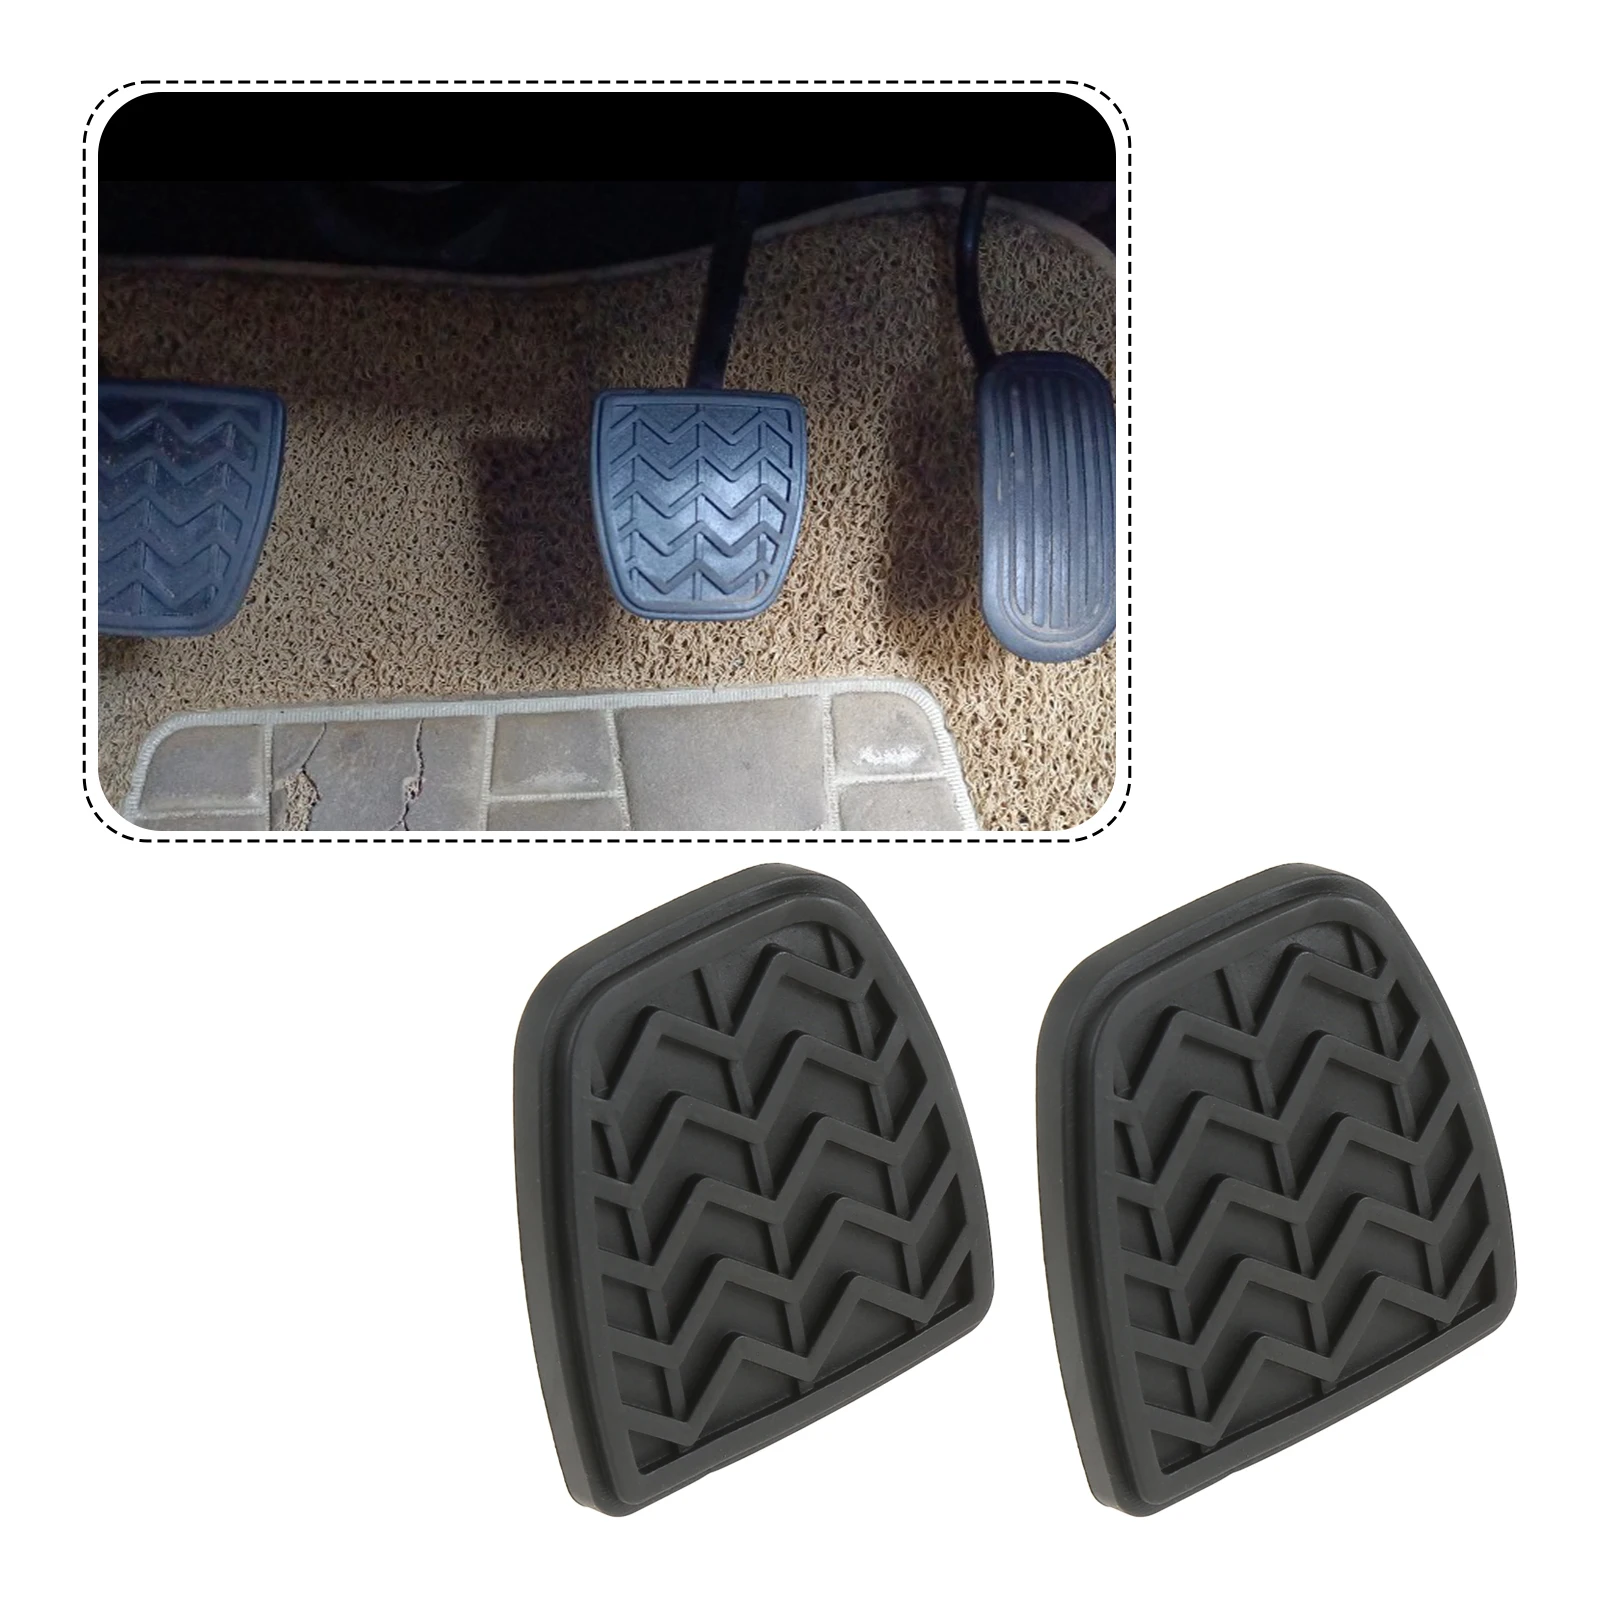 2Pcs Black Rubber Brake Clutch Pedal Pad Cover for Haval H6/M4 Toyota - $7.93